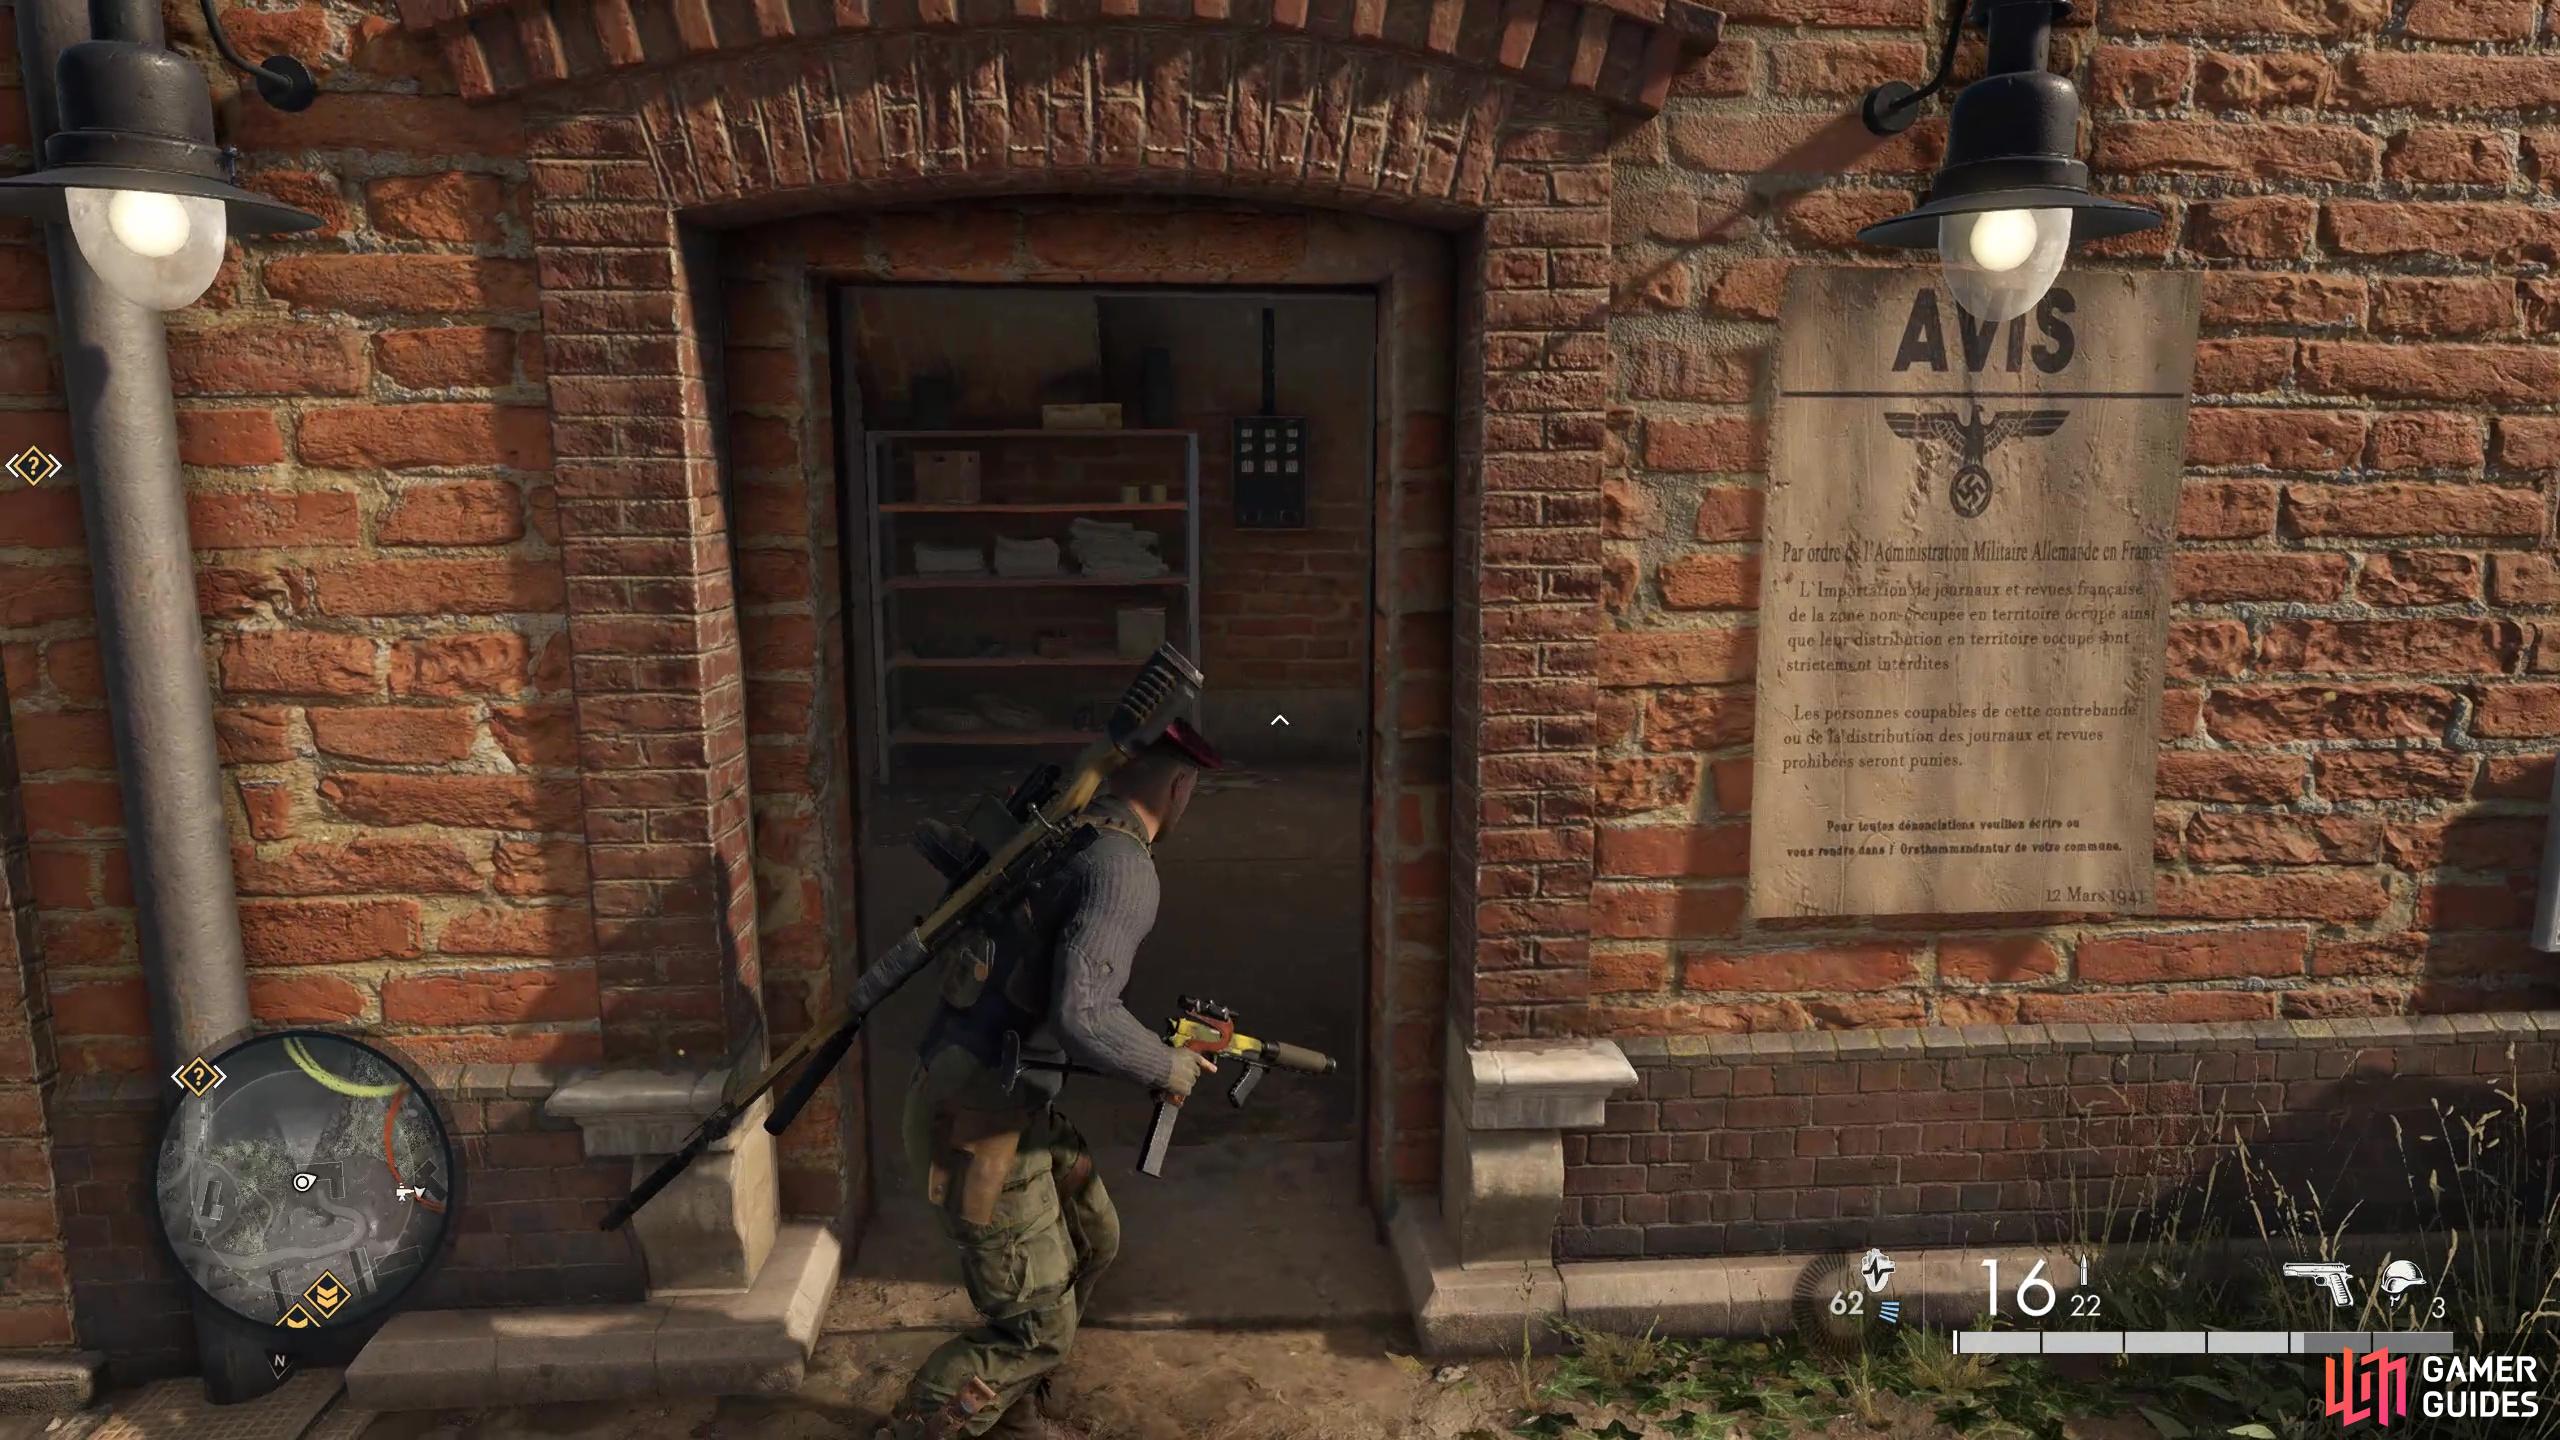 You will need to kill off a few guards before unlocking the workbench which is inside this building.